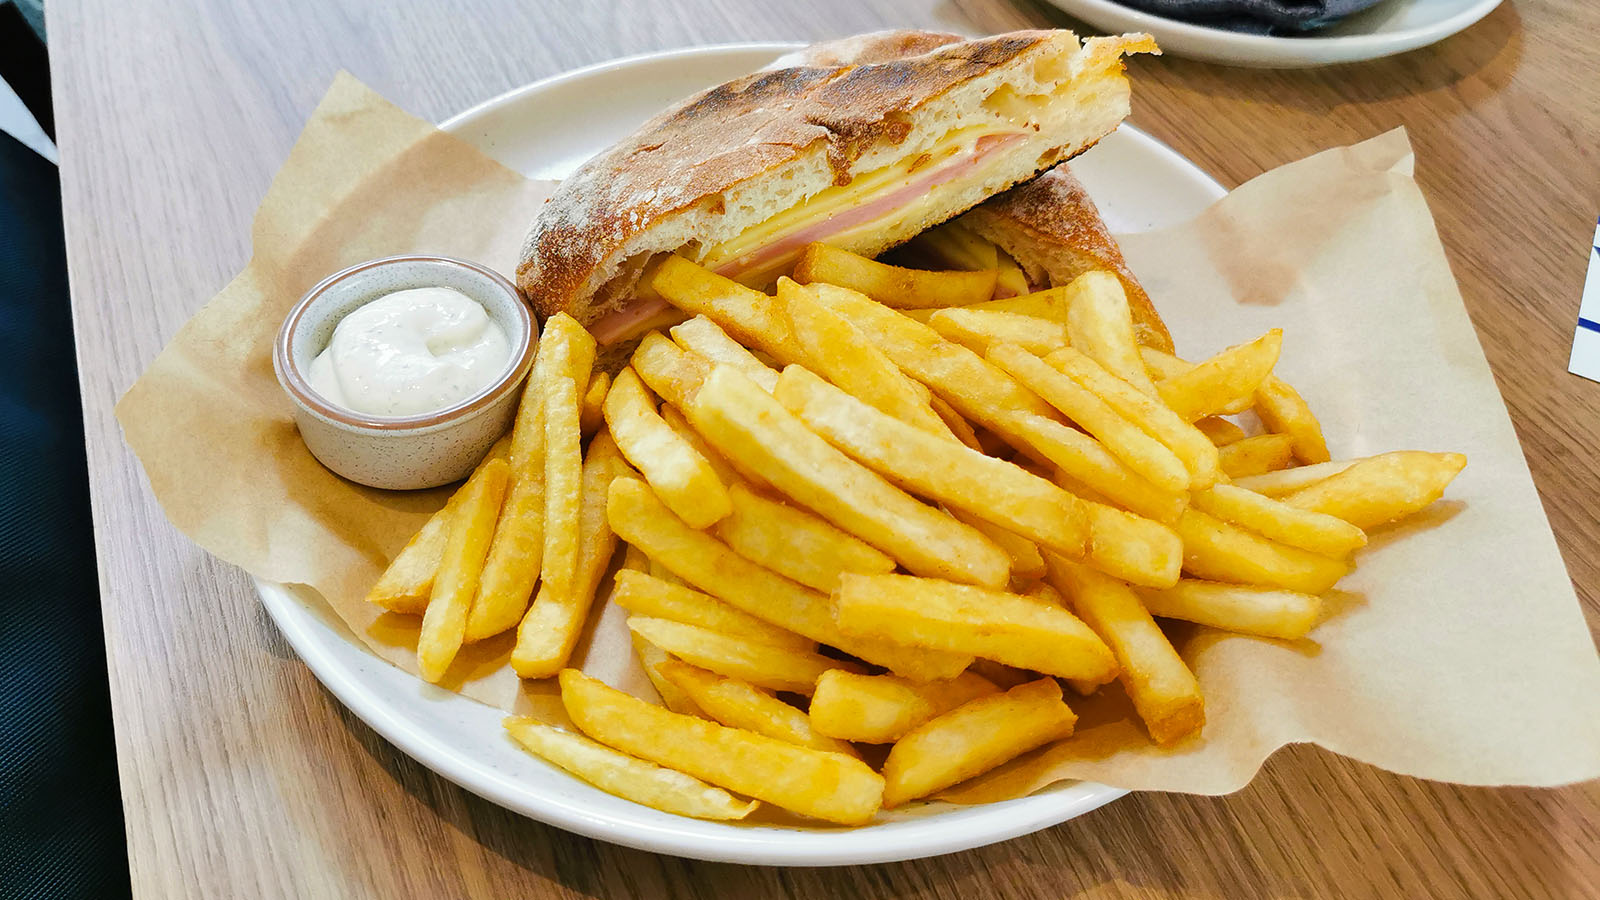 Toastie and chips at at Novotel Perth Murray Street's Third Space lounge bar